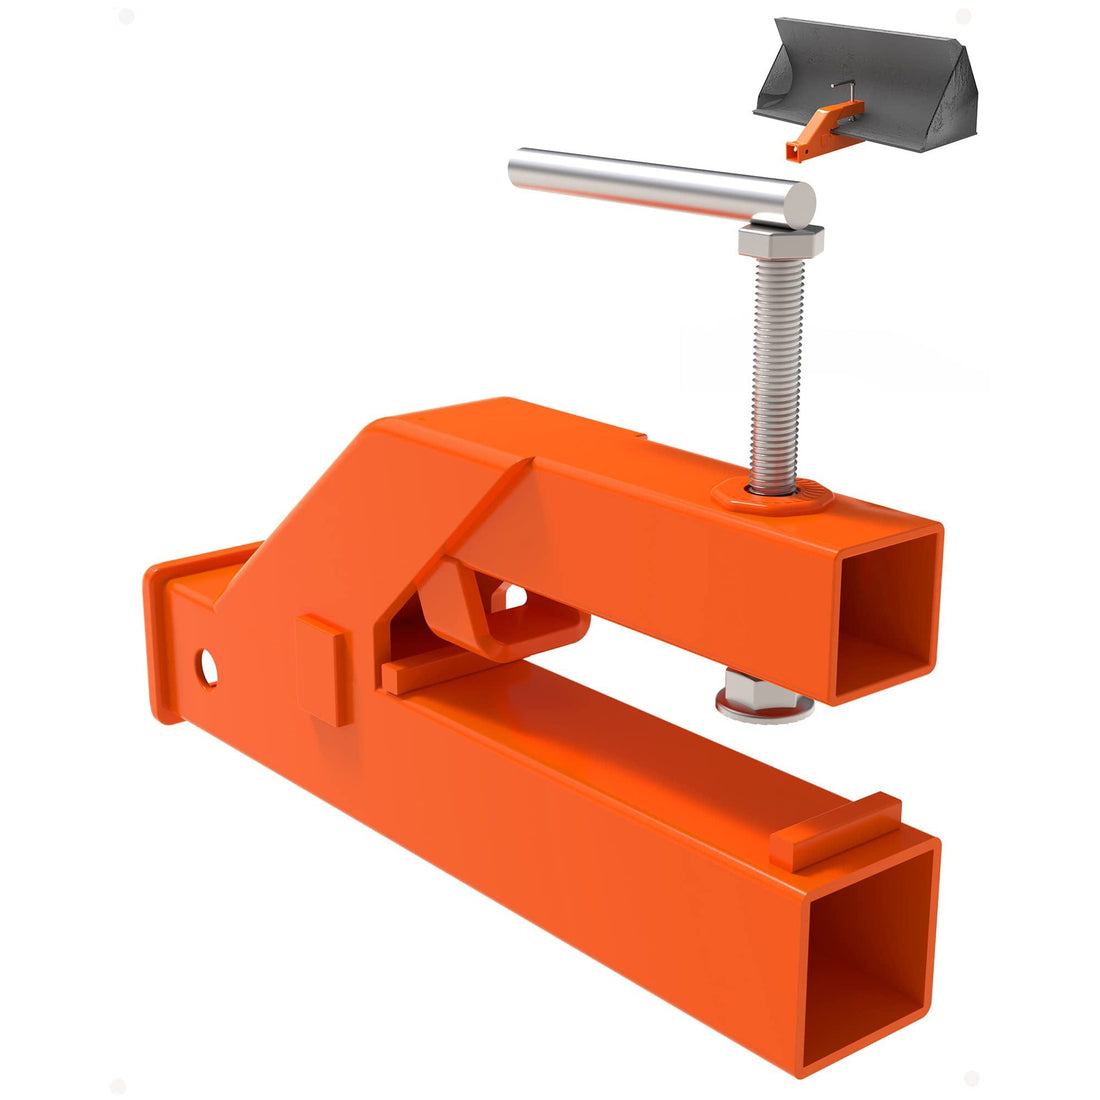 2 Inch Clamp-On Trailer Hitch Receiver for Tractor Bucket Adapter